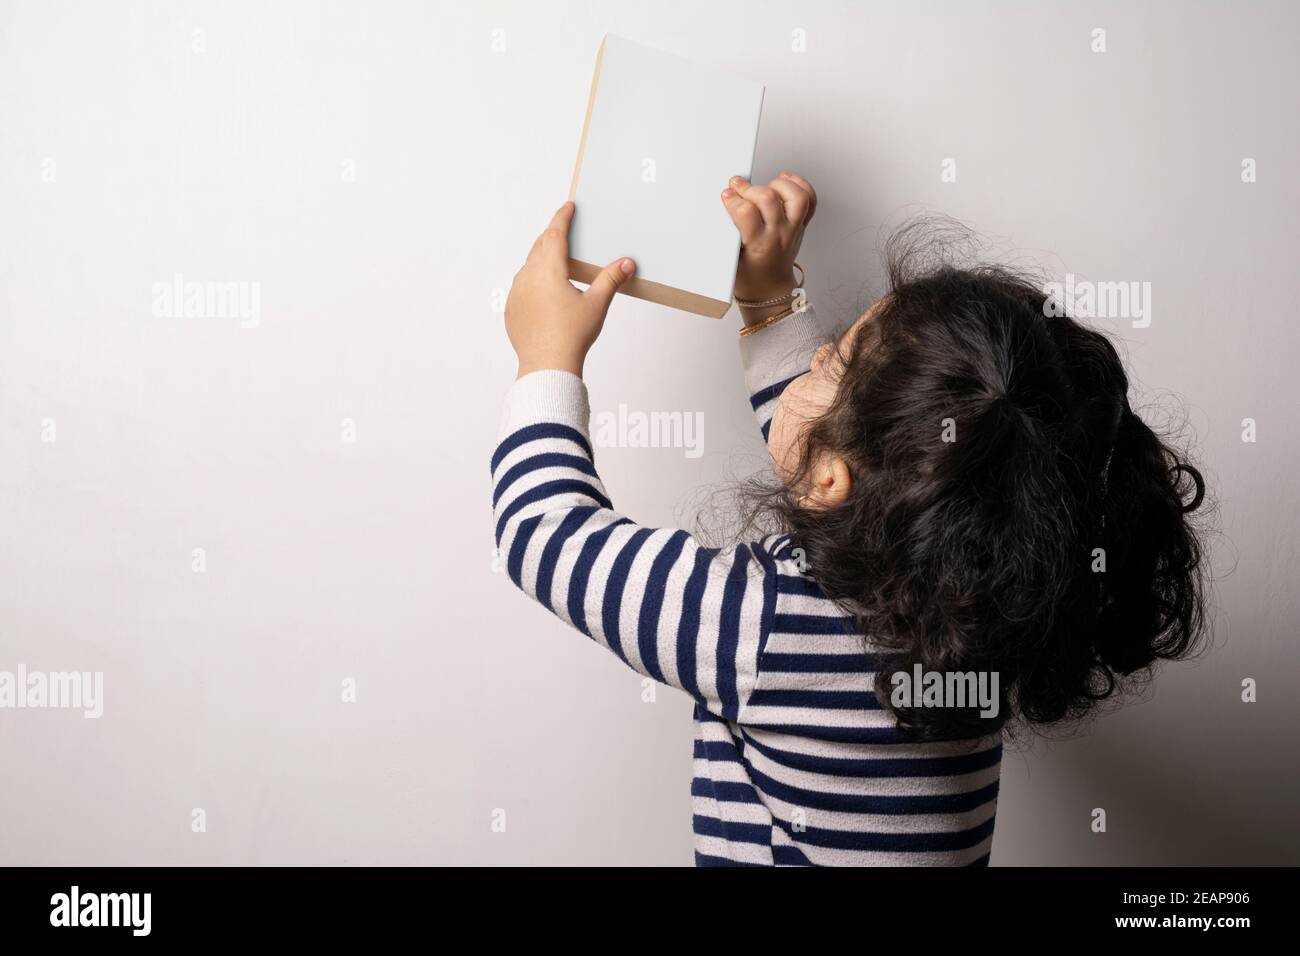 Little girl holding a novel book with blank cover in front white background mock-up series Stock Photo